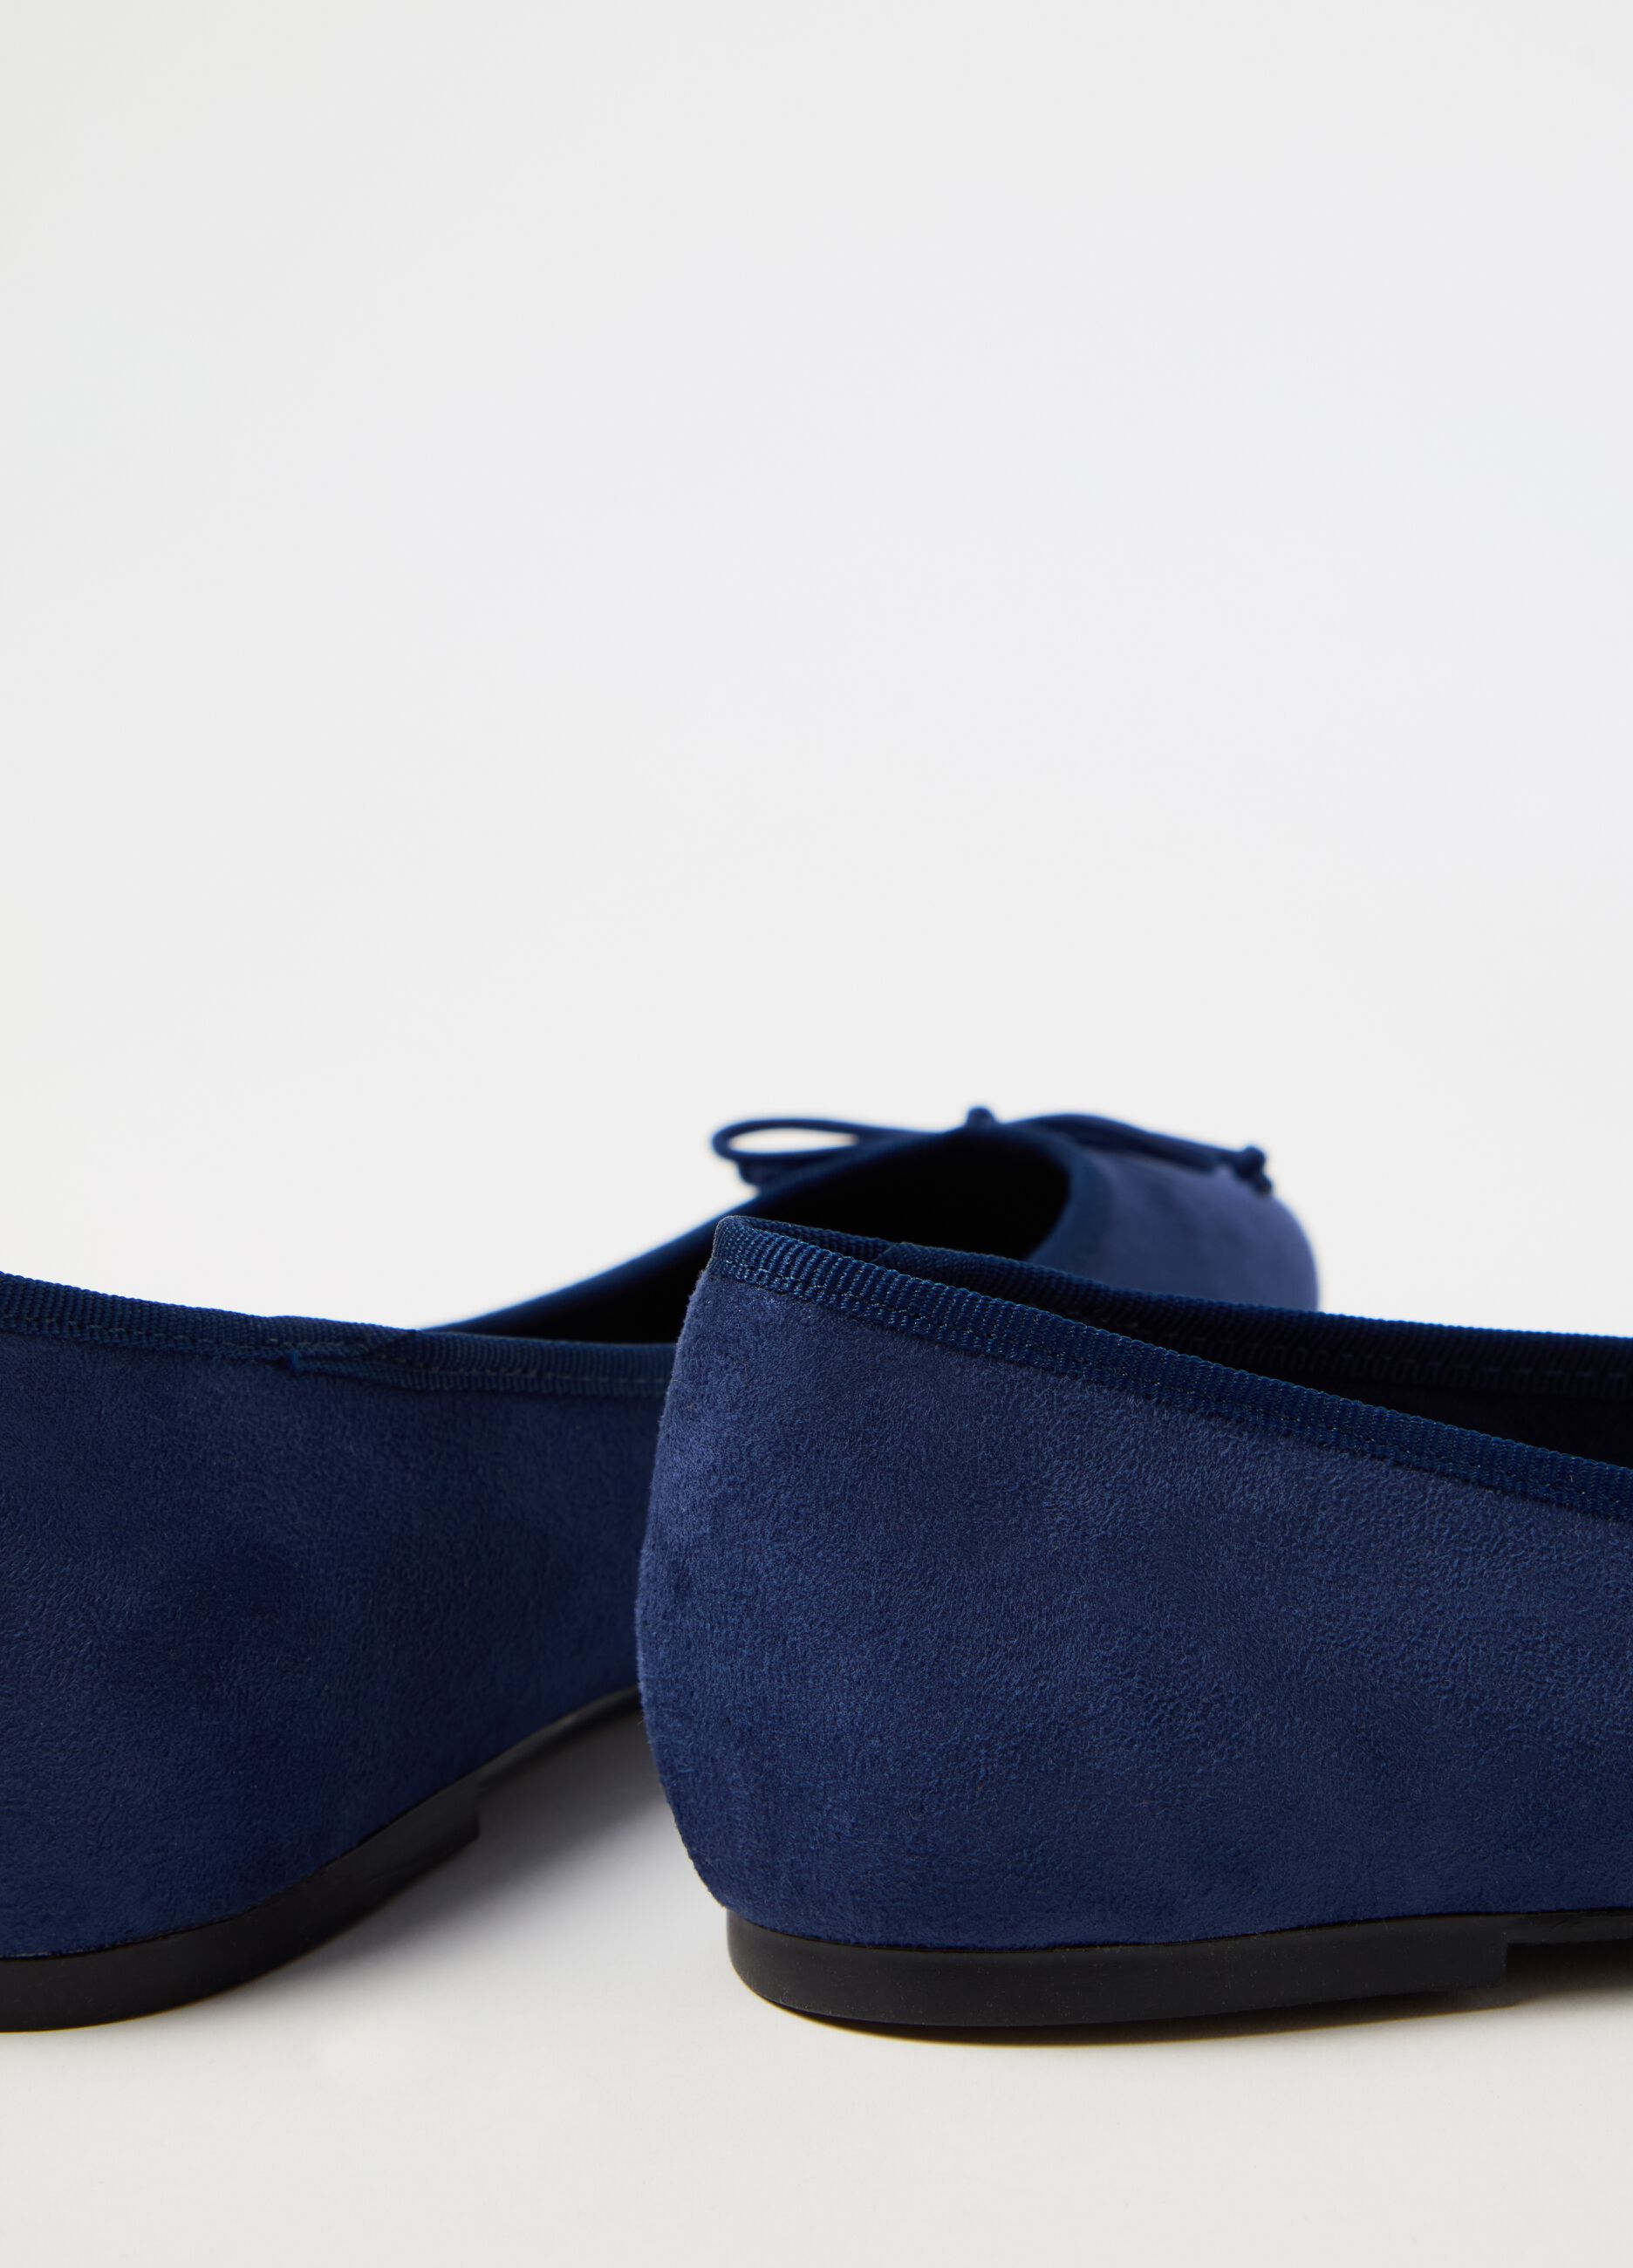 Suede ballerina flats with bow